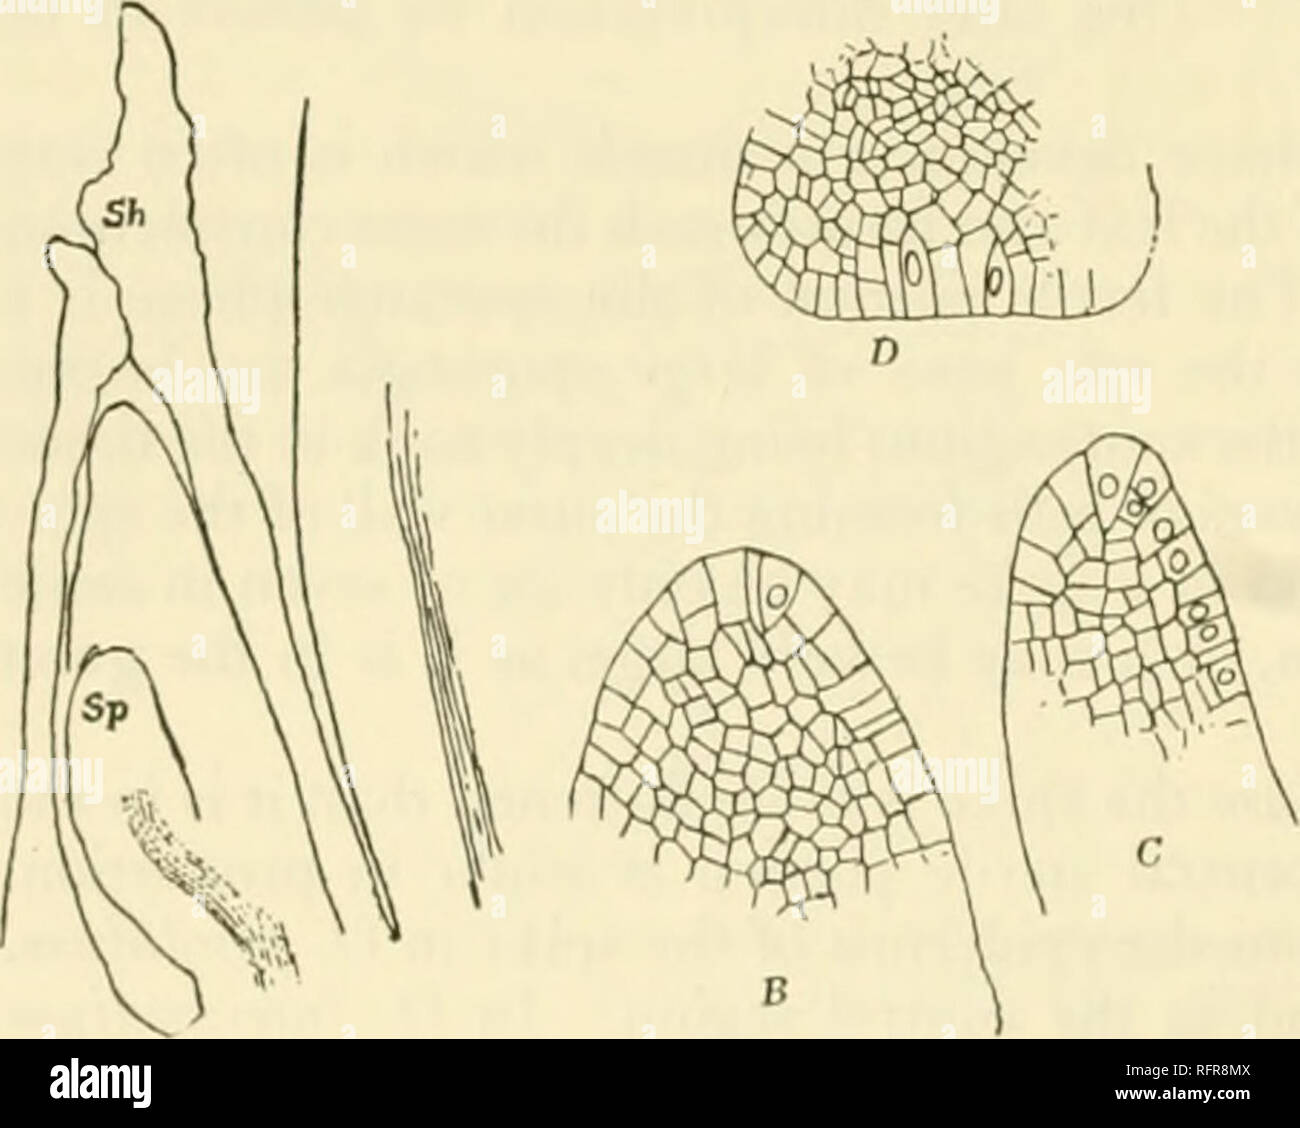 . Carnegie Institution of Washington publication. 110 THE OPHIOGLOSSALES sterile lamina. In the larger species, like B. virginianum, many hundred sporangia may be developed upon a single sporangiophore. In these larger and more special- ized forms the sporangium is usually smaller and is better differentiated, always having a more or less distinct pedicel. The form of the sporangiophore in Helminthostachys is to some extent inter- mediate between that of Ophioglossum and Botrychium, but on the whole comes nearer to Botrychium. The sporangia are densely crowded along the Hanks of the spike, thu Stock Photo